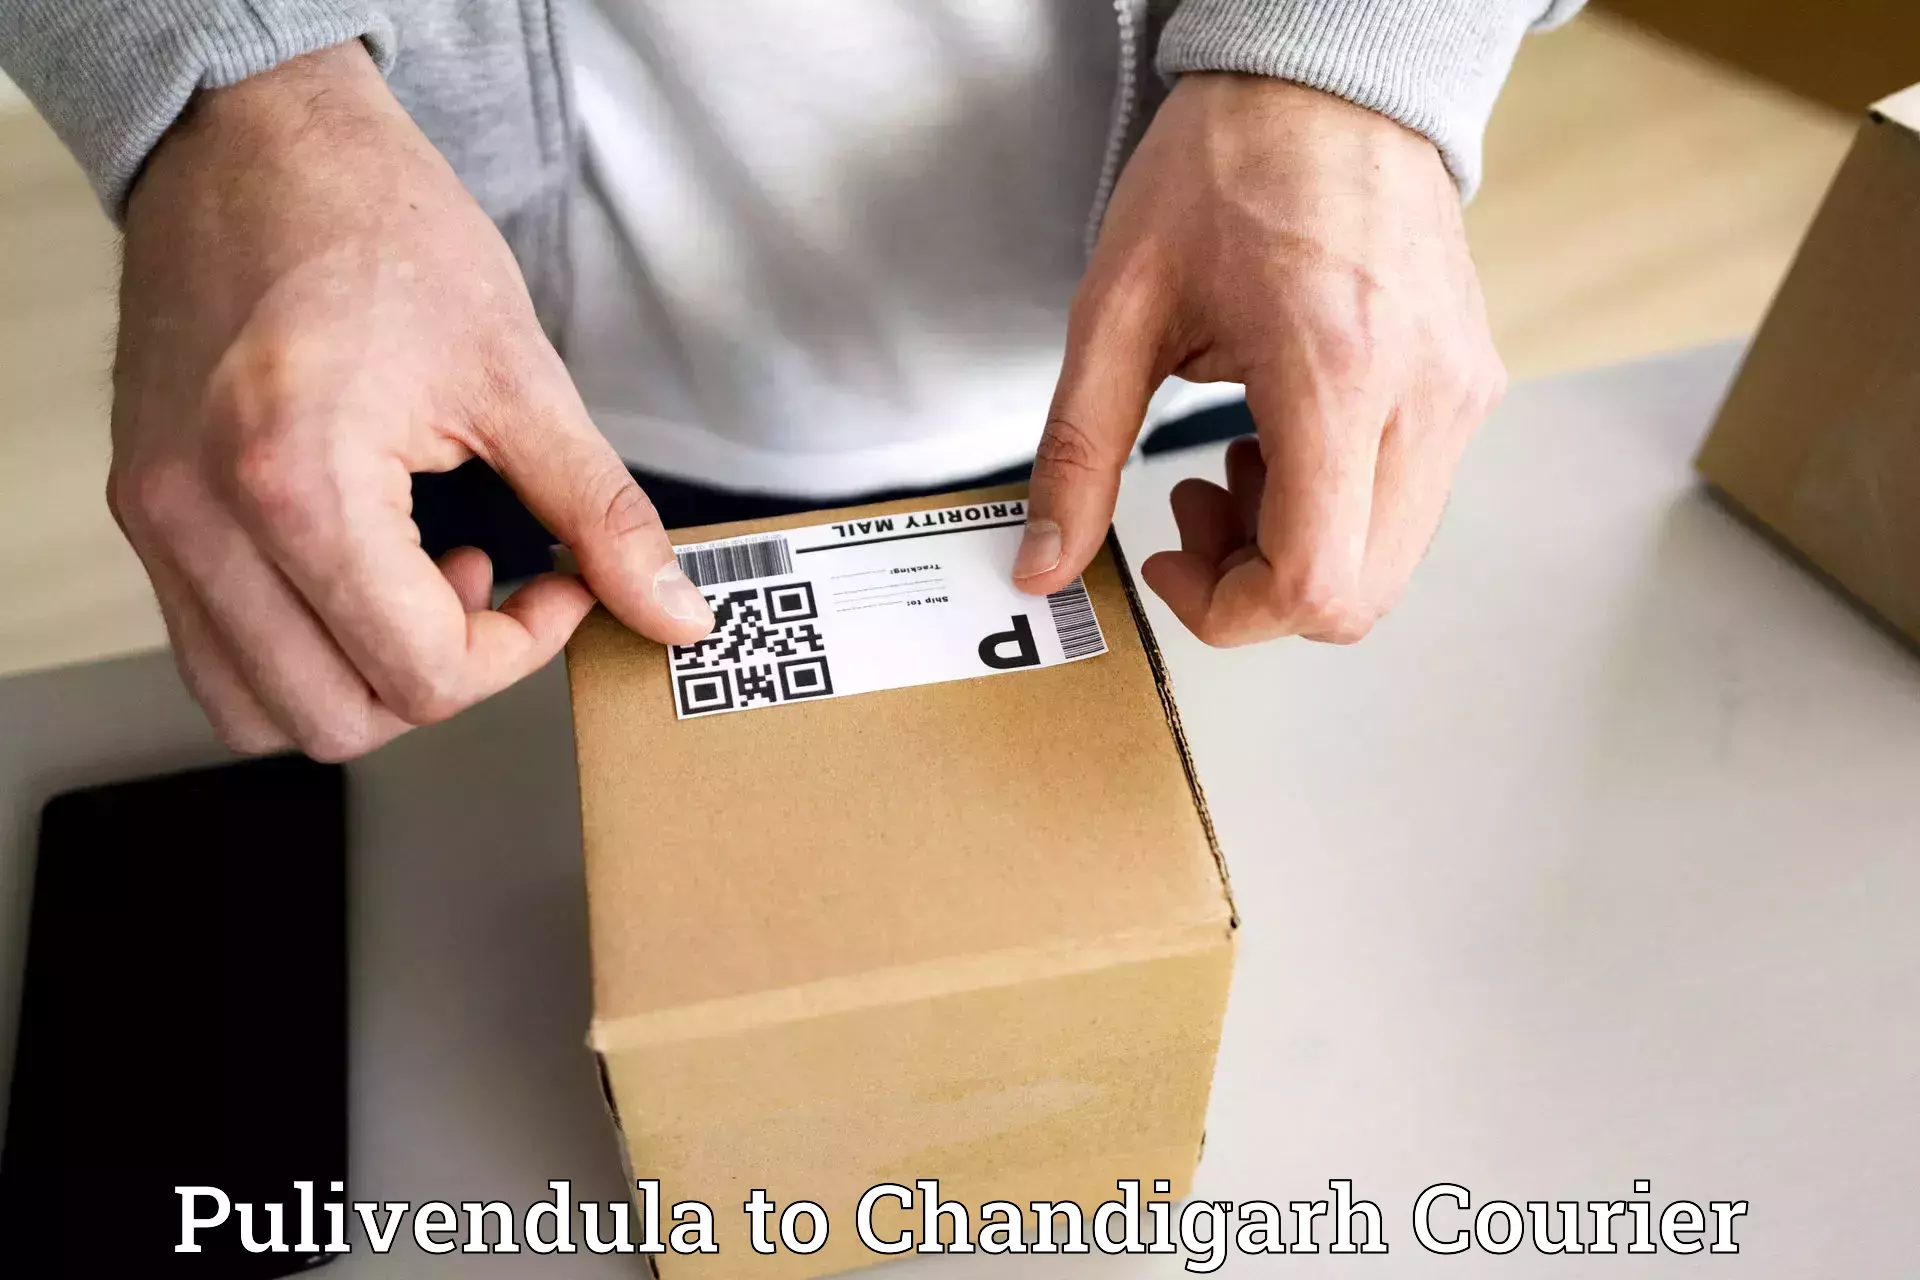 Expedited shipping methods Pulivendula to Chandigarh